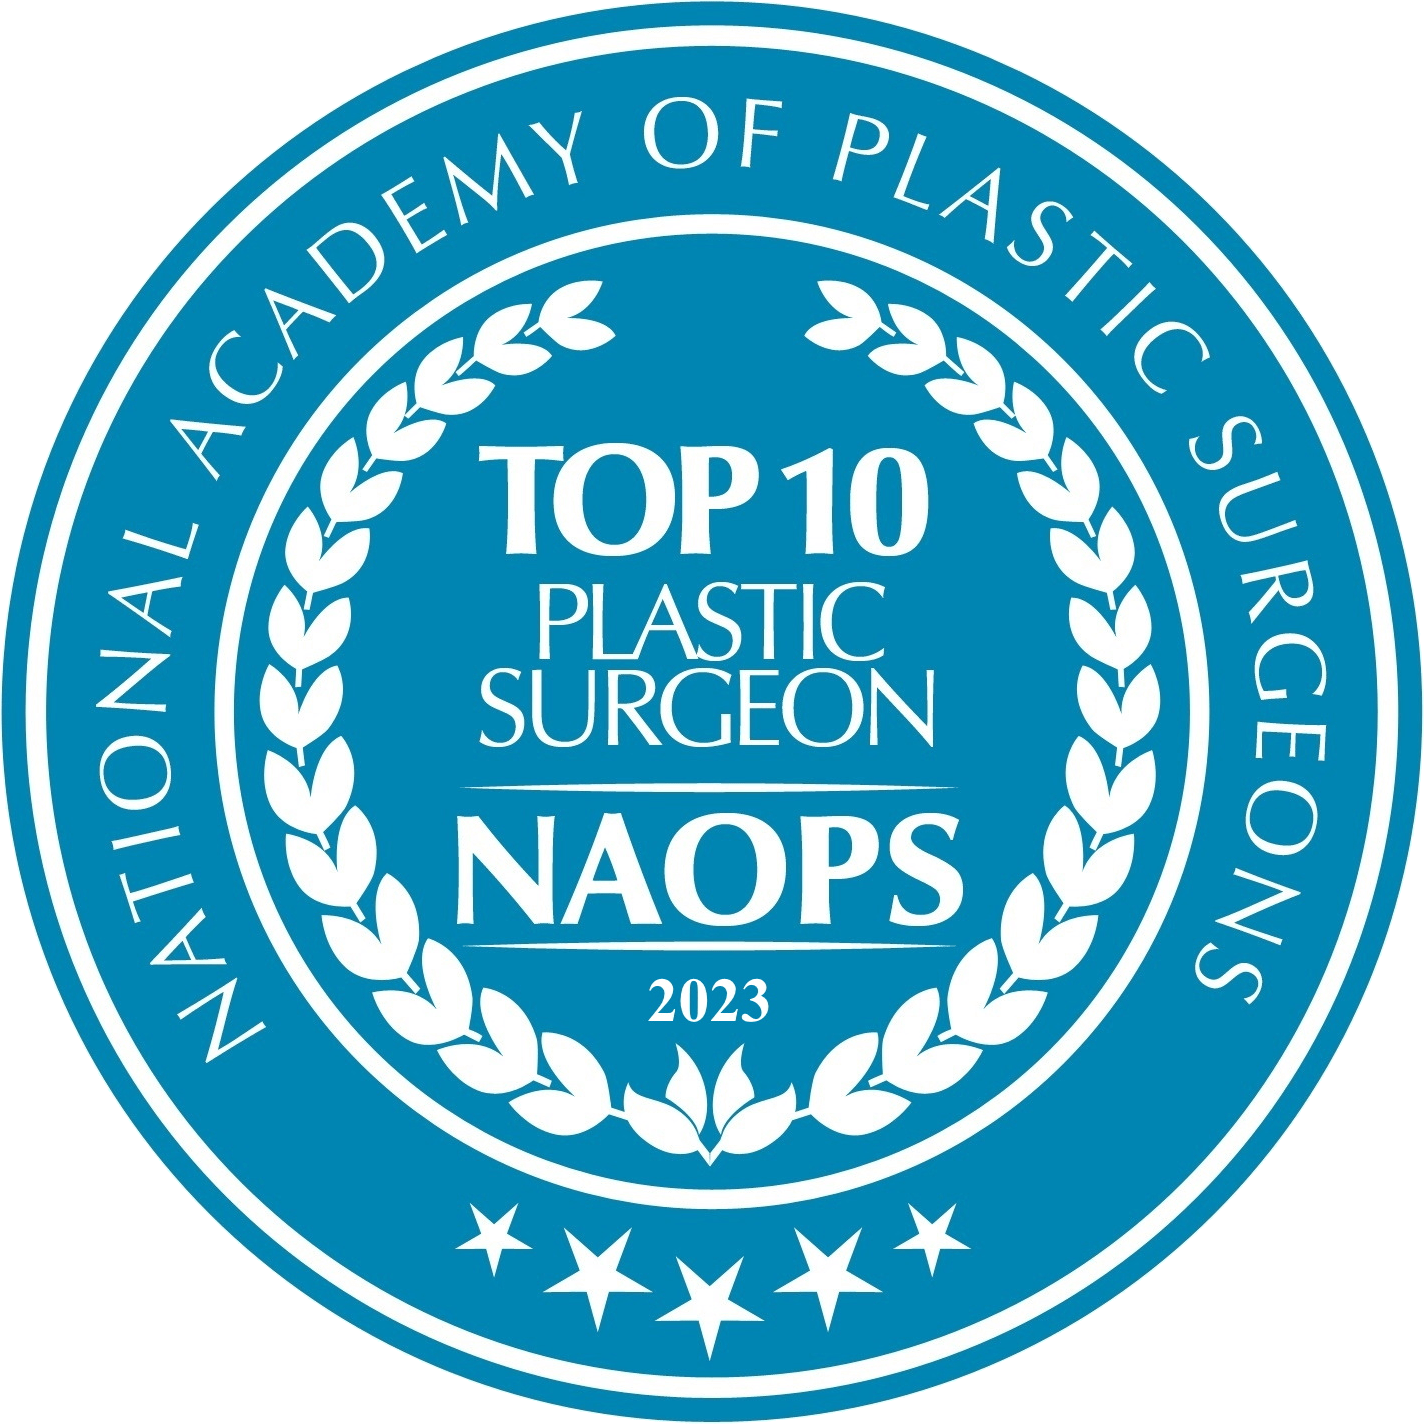 National Academy of Plastic Surgeons Top 10 - 2023